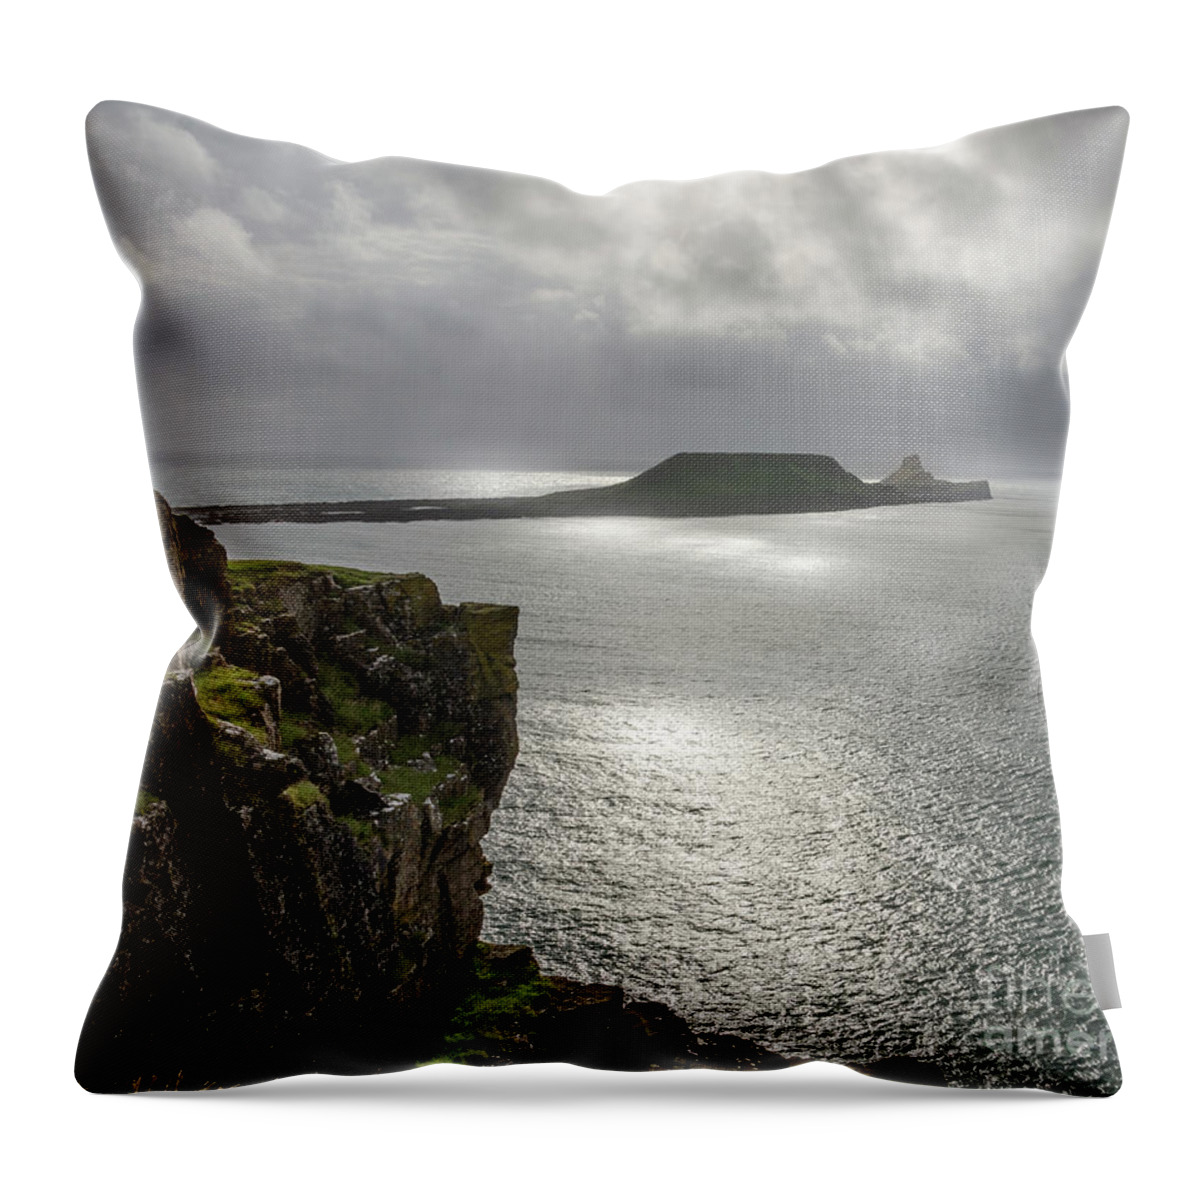 Worms Throw Pillow featuring the photograph Worms Head, Rhossili Bay 2 by Perry Rodriguez